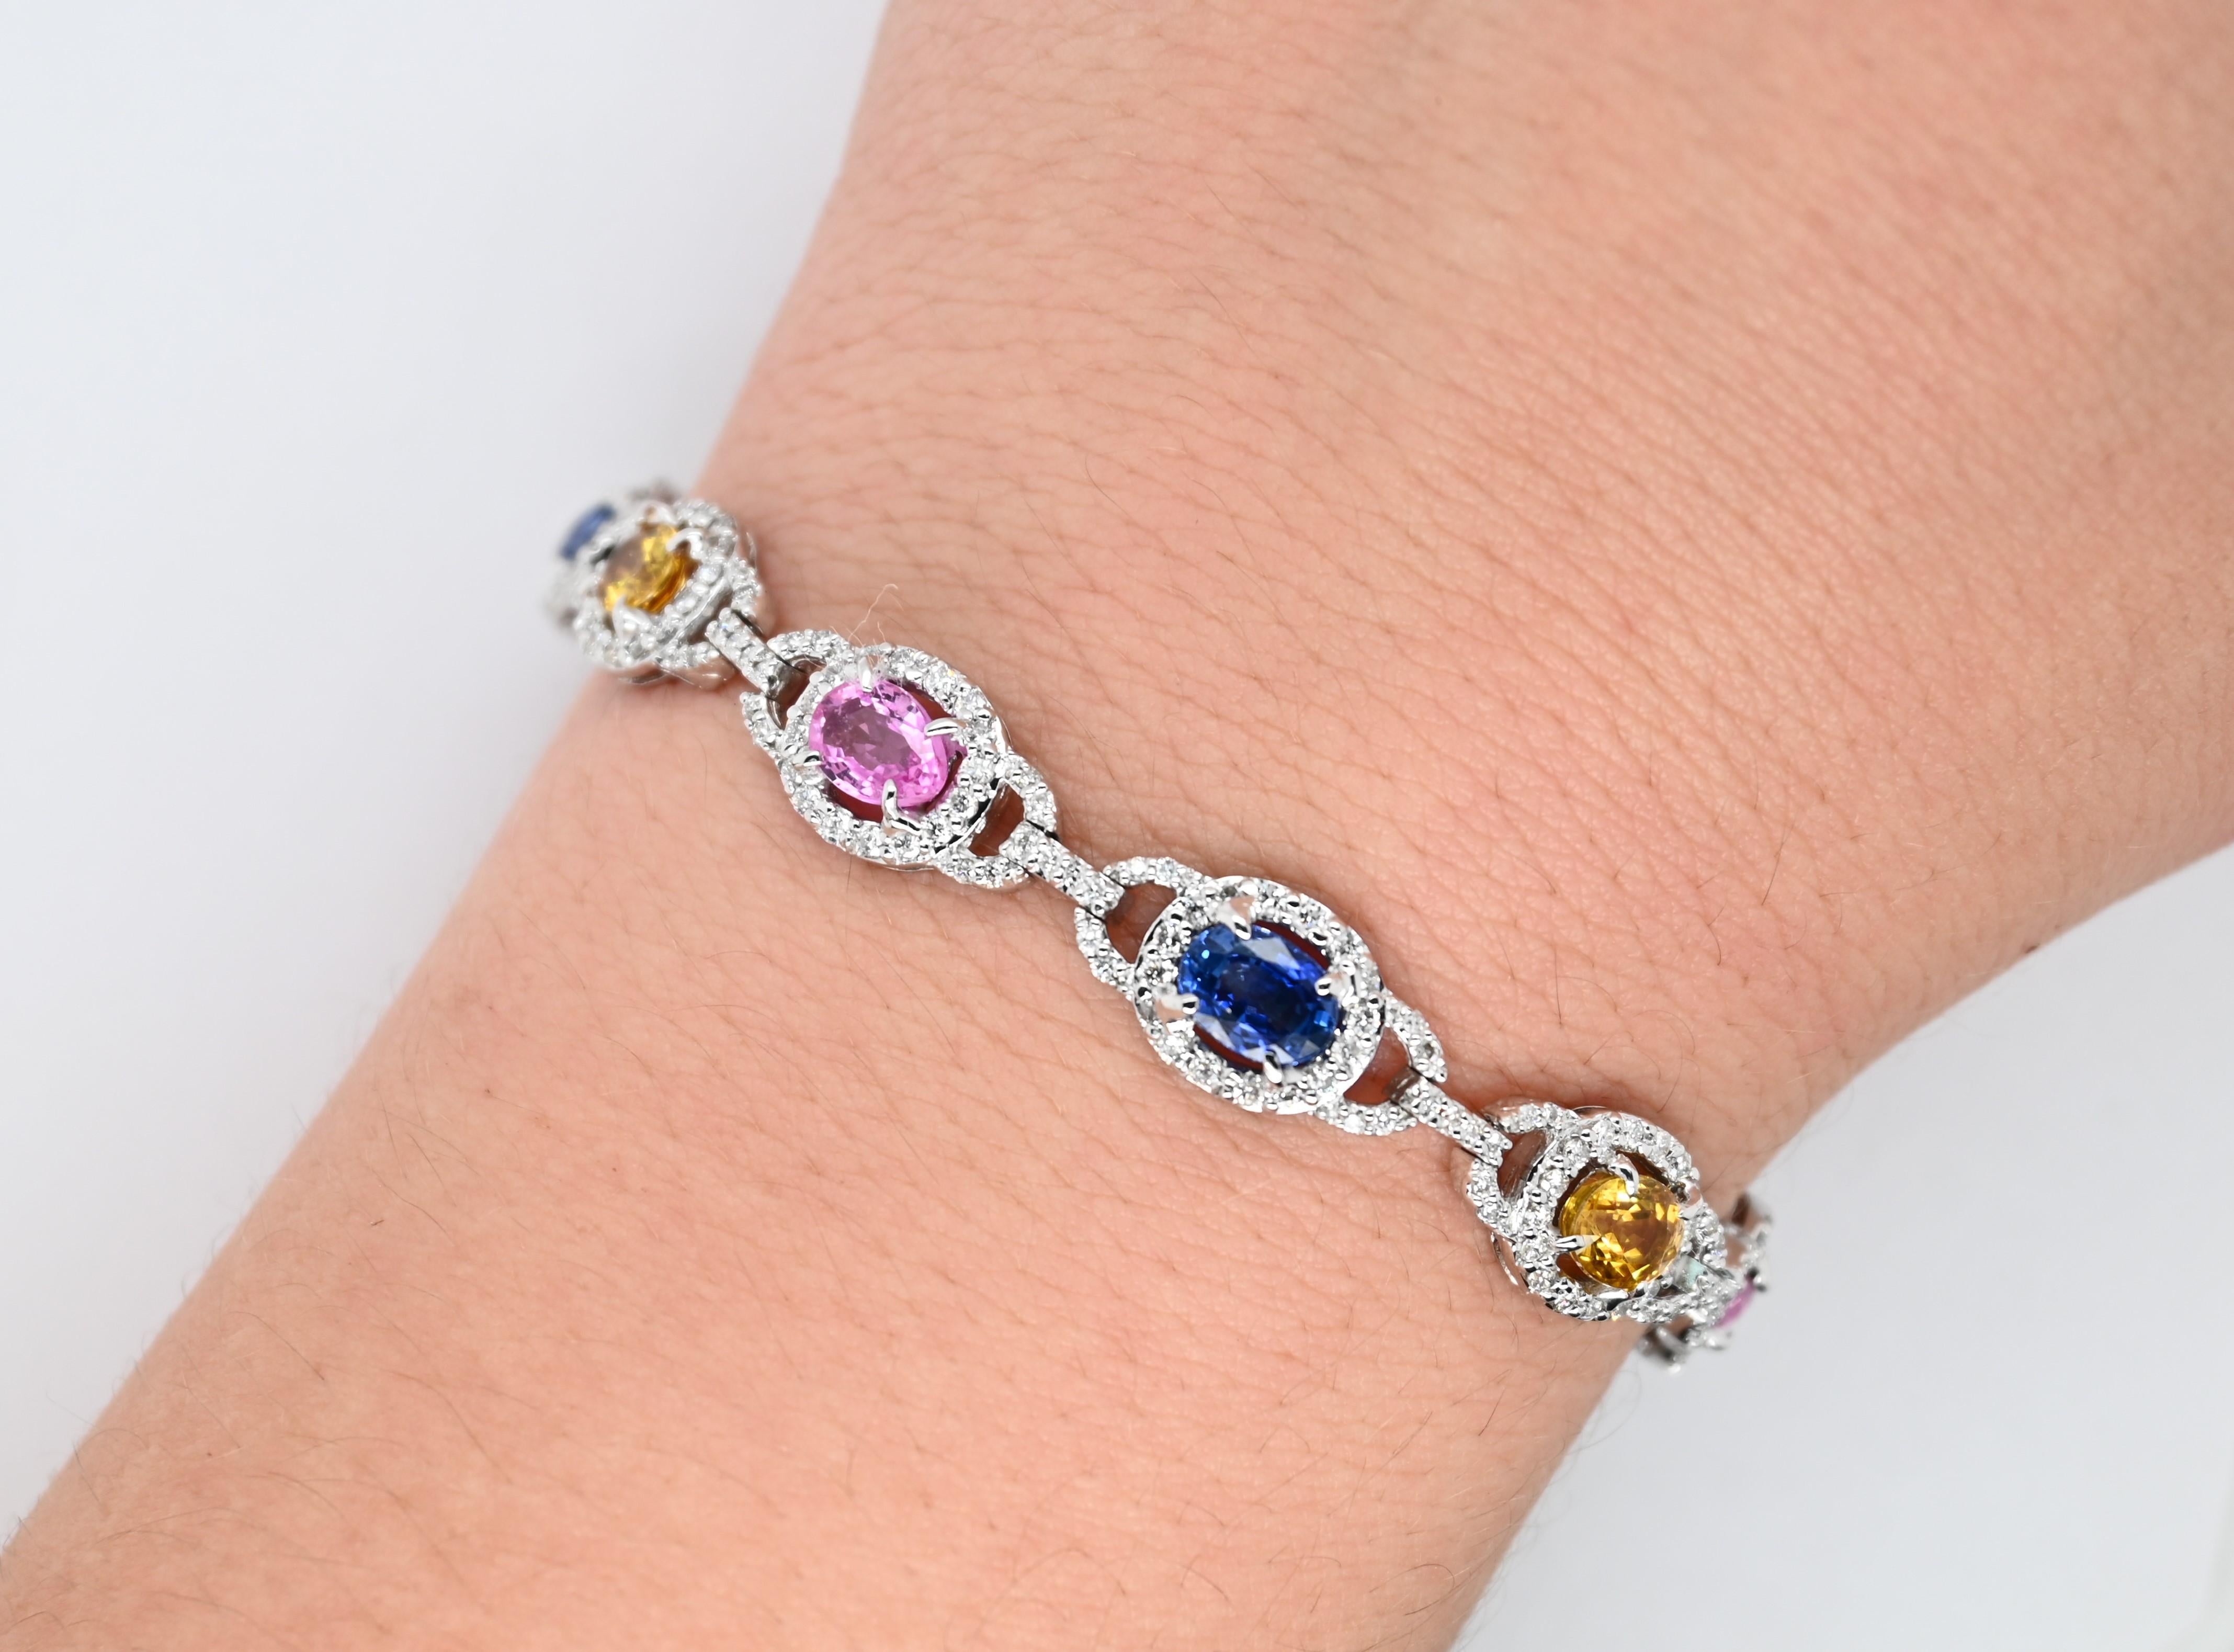 Original Magnum Creation diamond and mixed sapphire bracelet features 2.18 carats of white diamonds and 8.27 carats of mixed color sapphires, mounted on 14 karats whit gold.